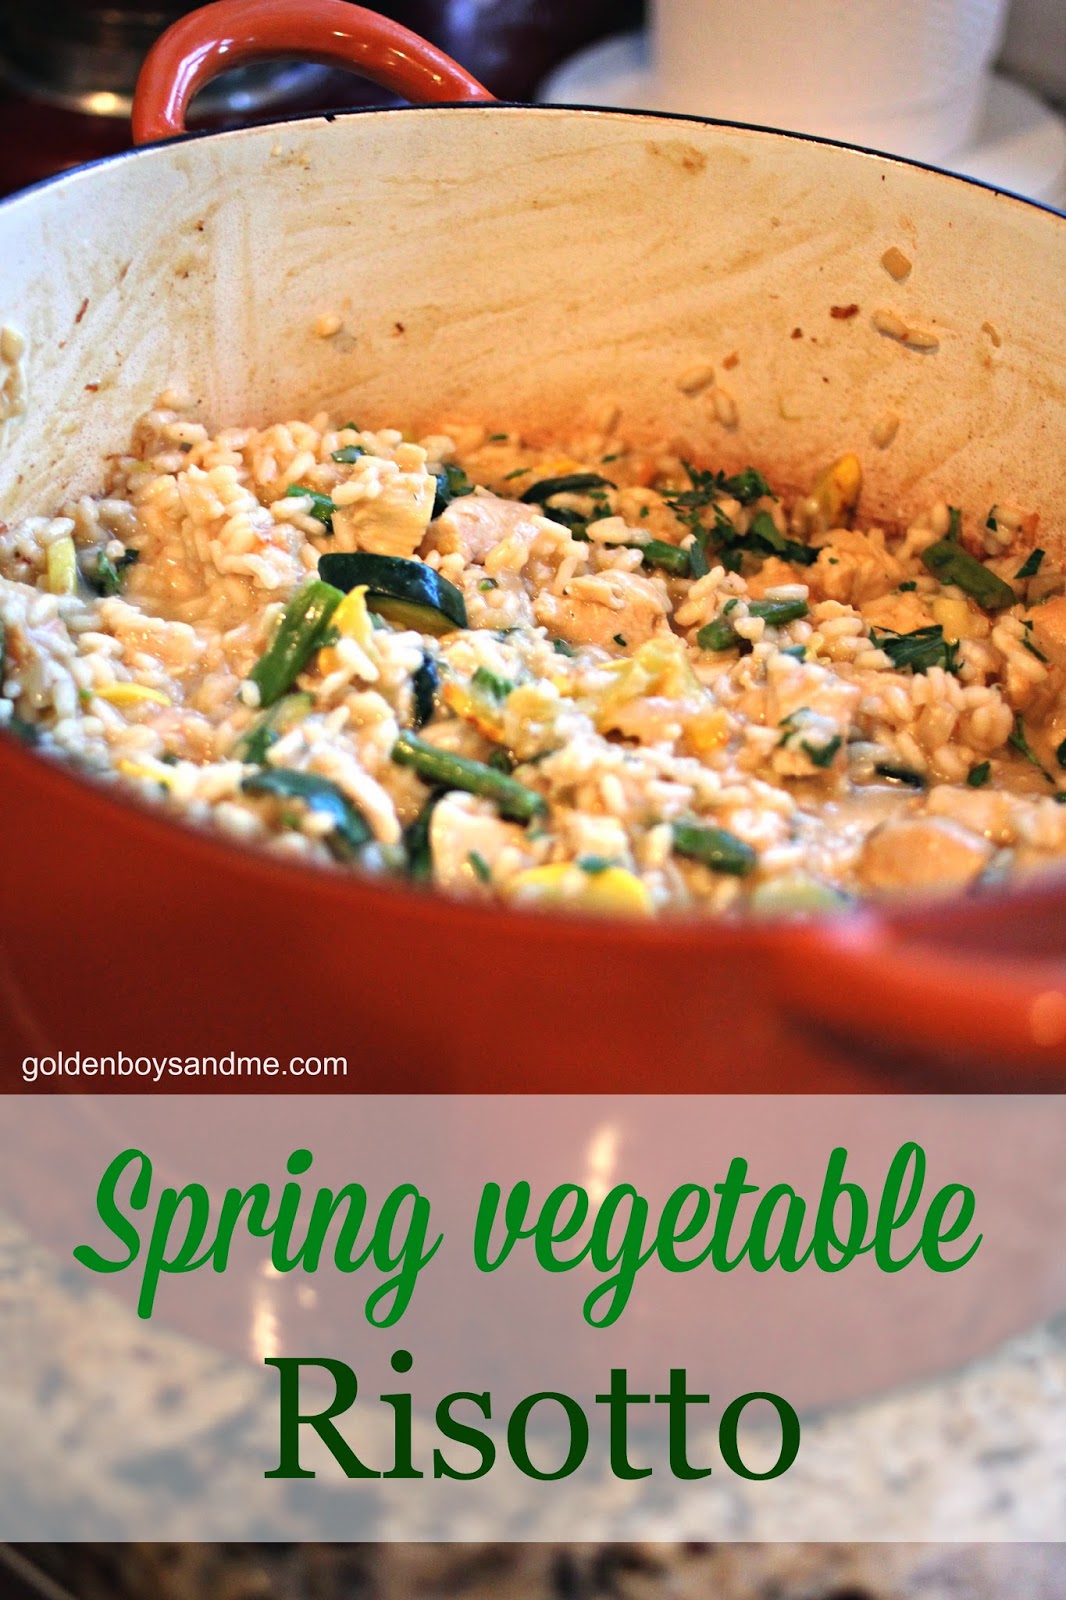 Spring vegetable risotto with chicken recipe-www.goldenboysandme.com